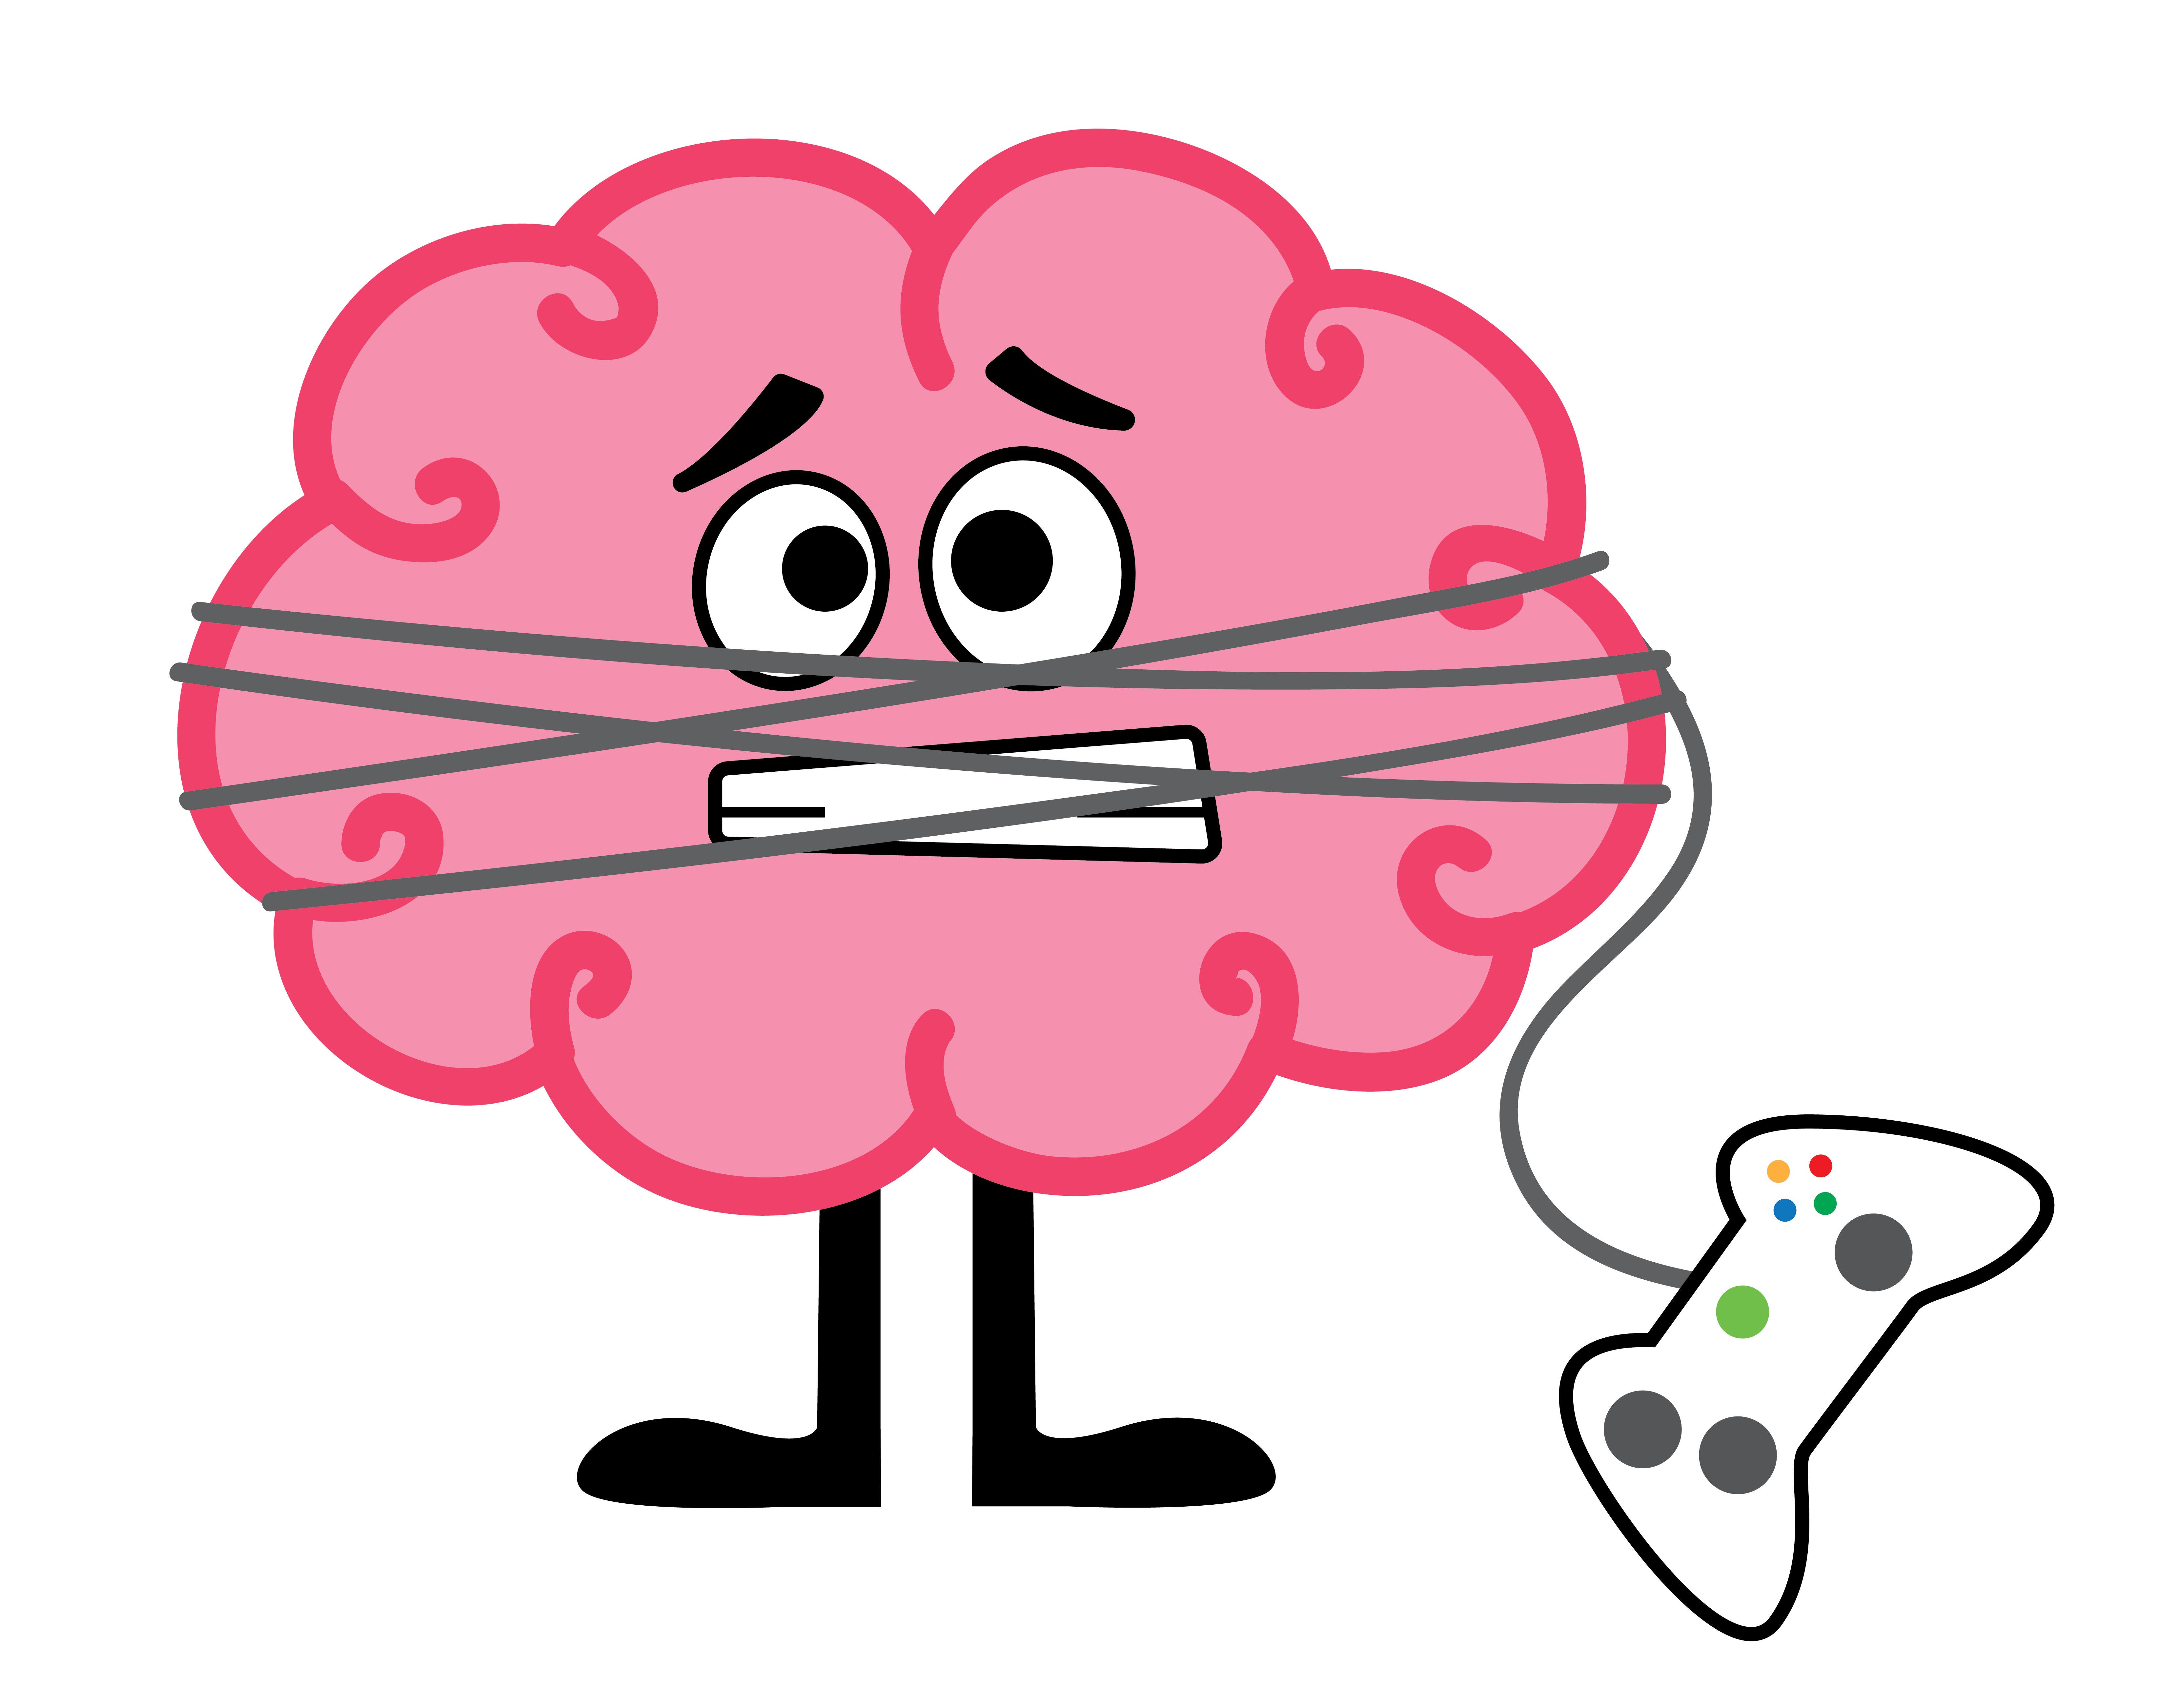 Gamer brains: are they born or made? – The Signpost